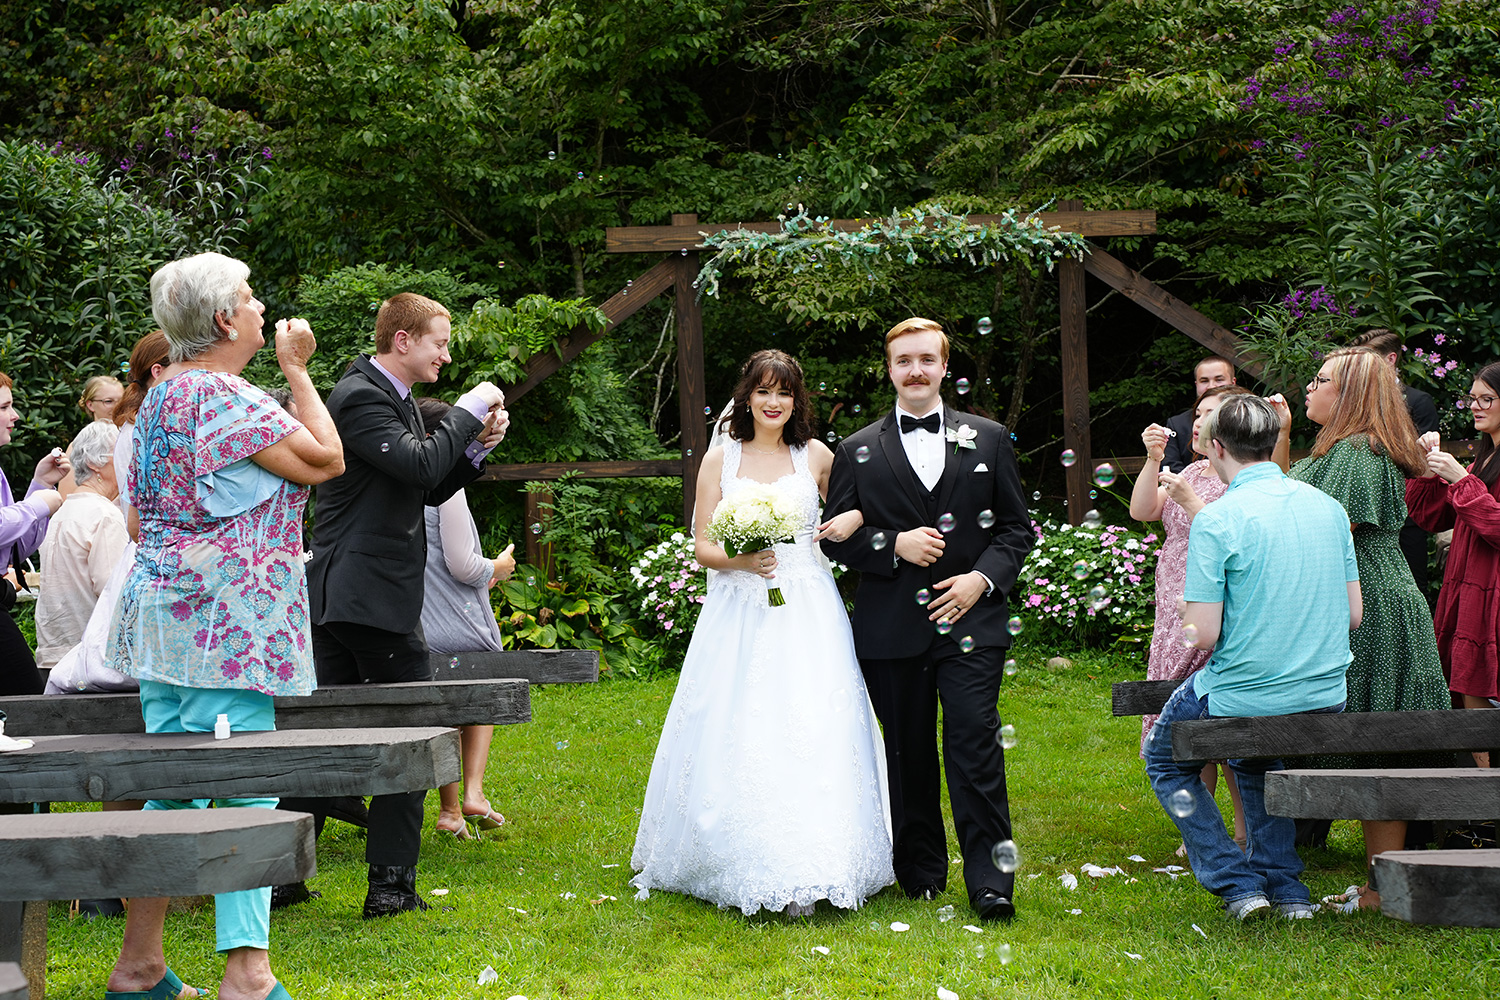 wedding recessional with bubbles in the summer at a wooden wedding arbor